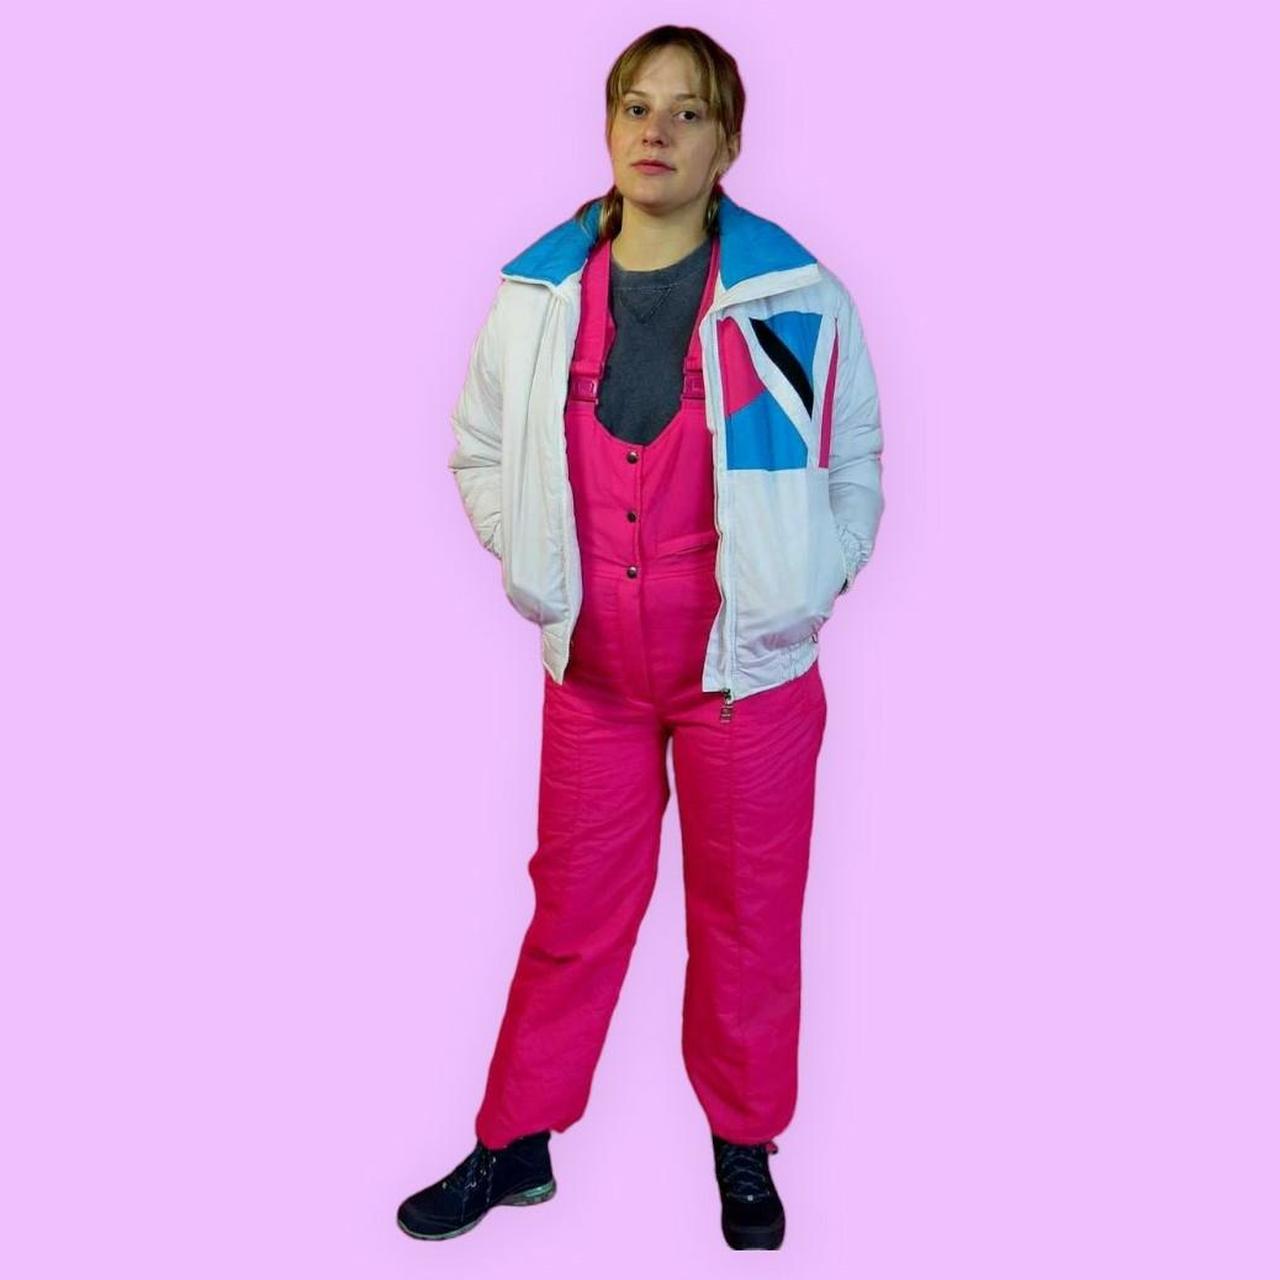 ❄️☃️80s Two Piece Ski Suit Set☃️❄️, This pink blue and